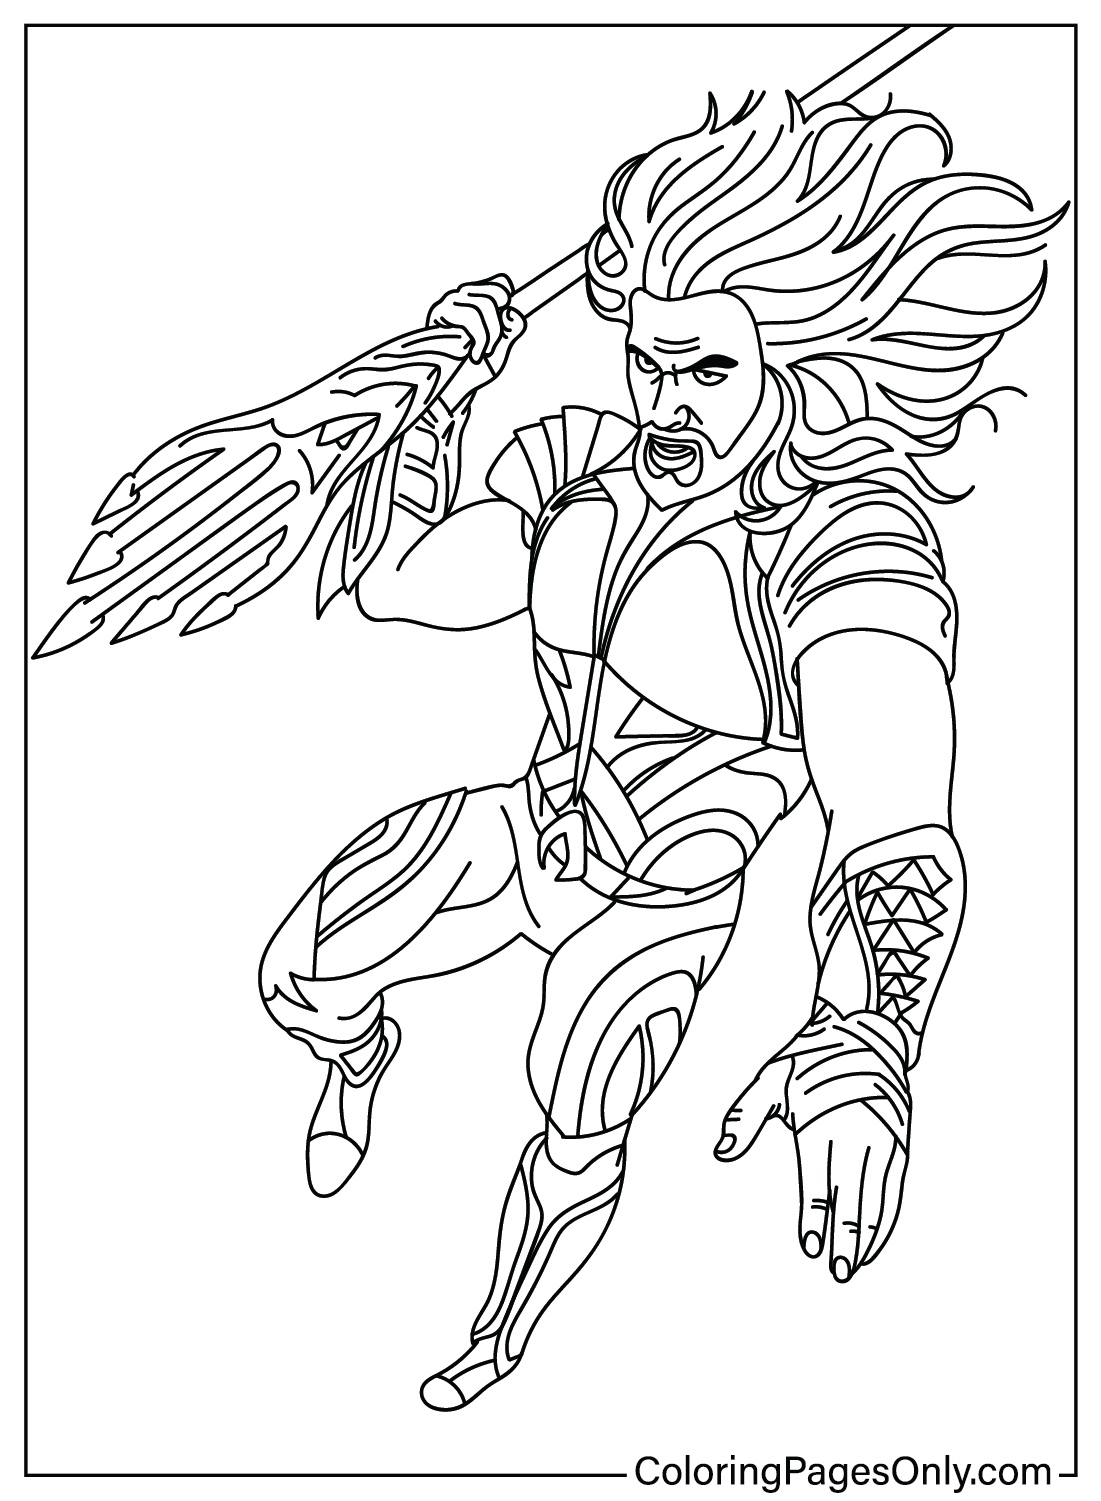 Aquaman Coloring Pages to Download from Aquaman